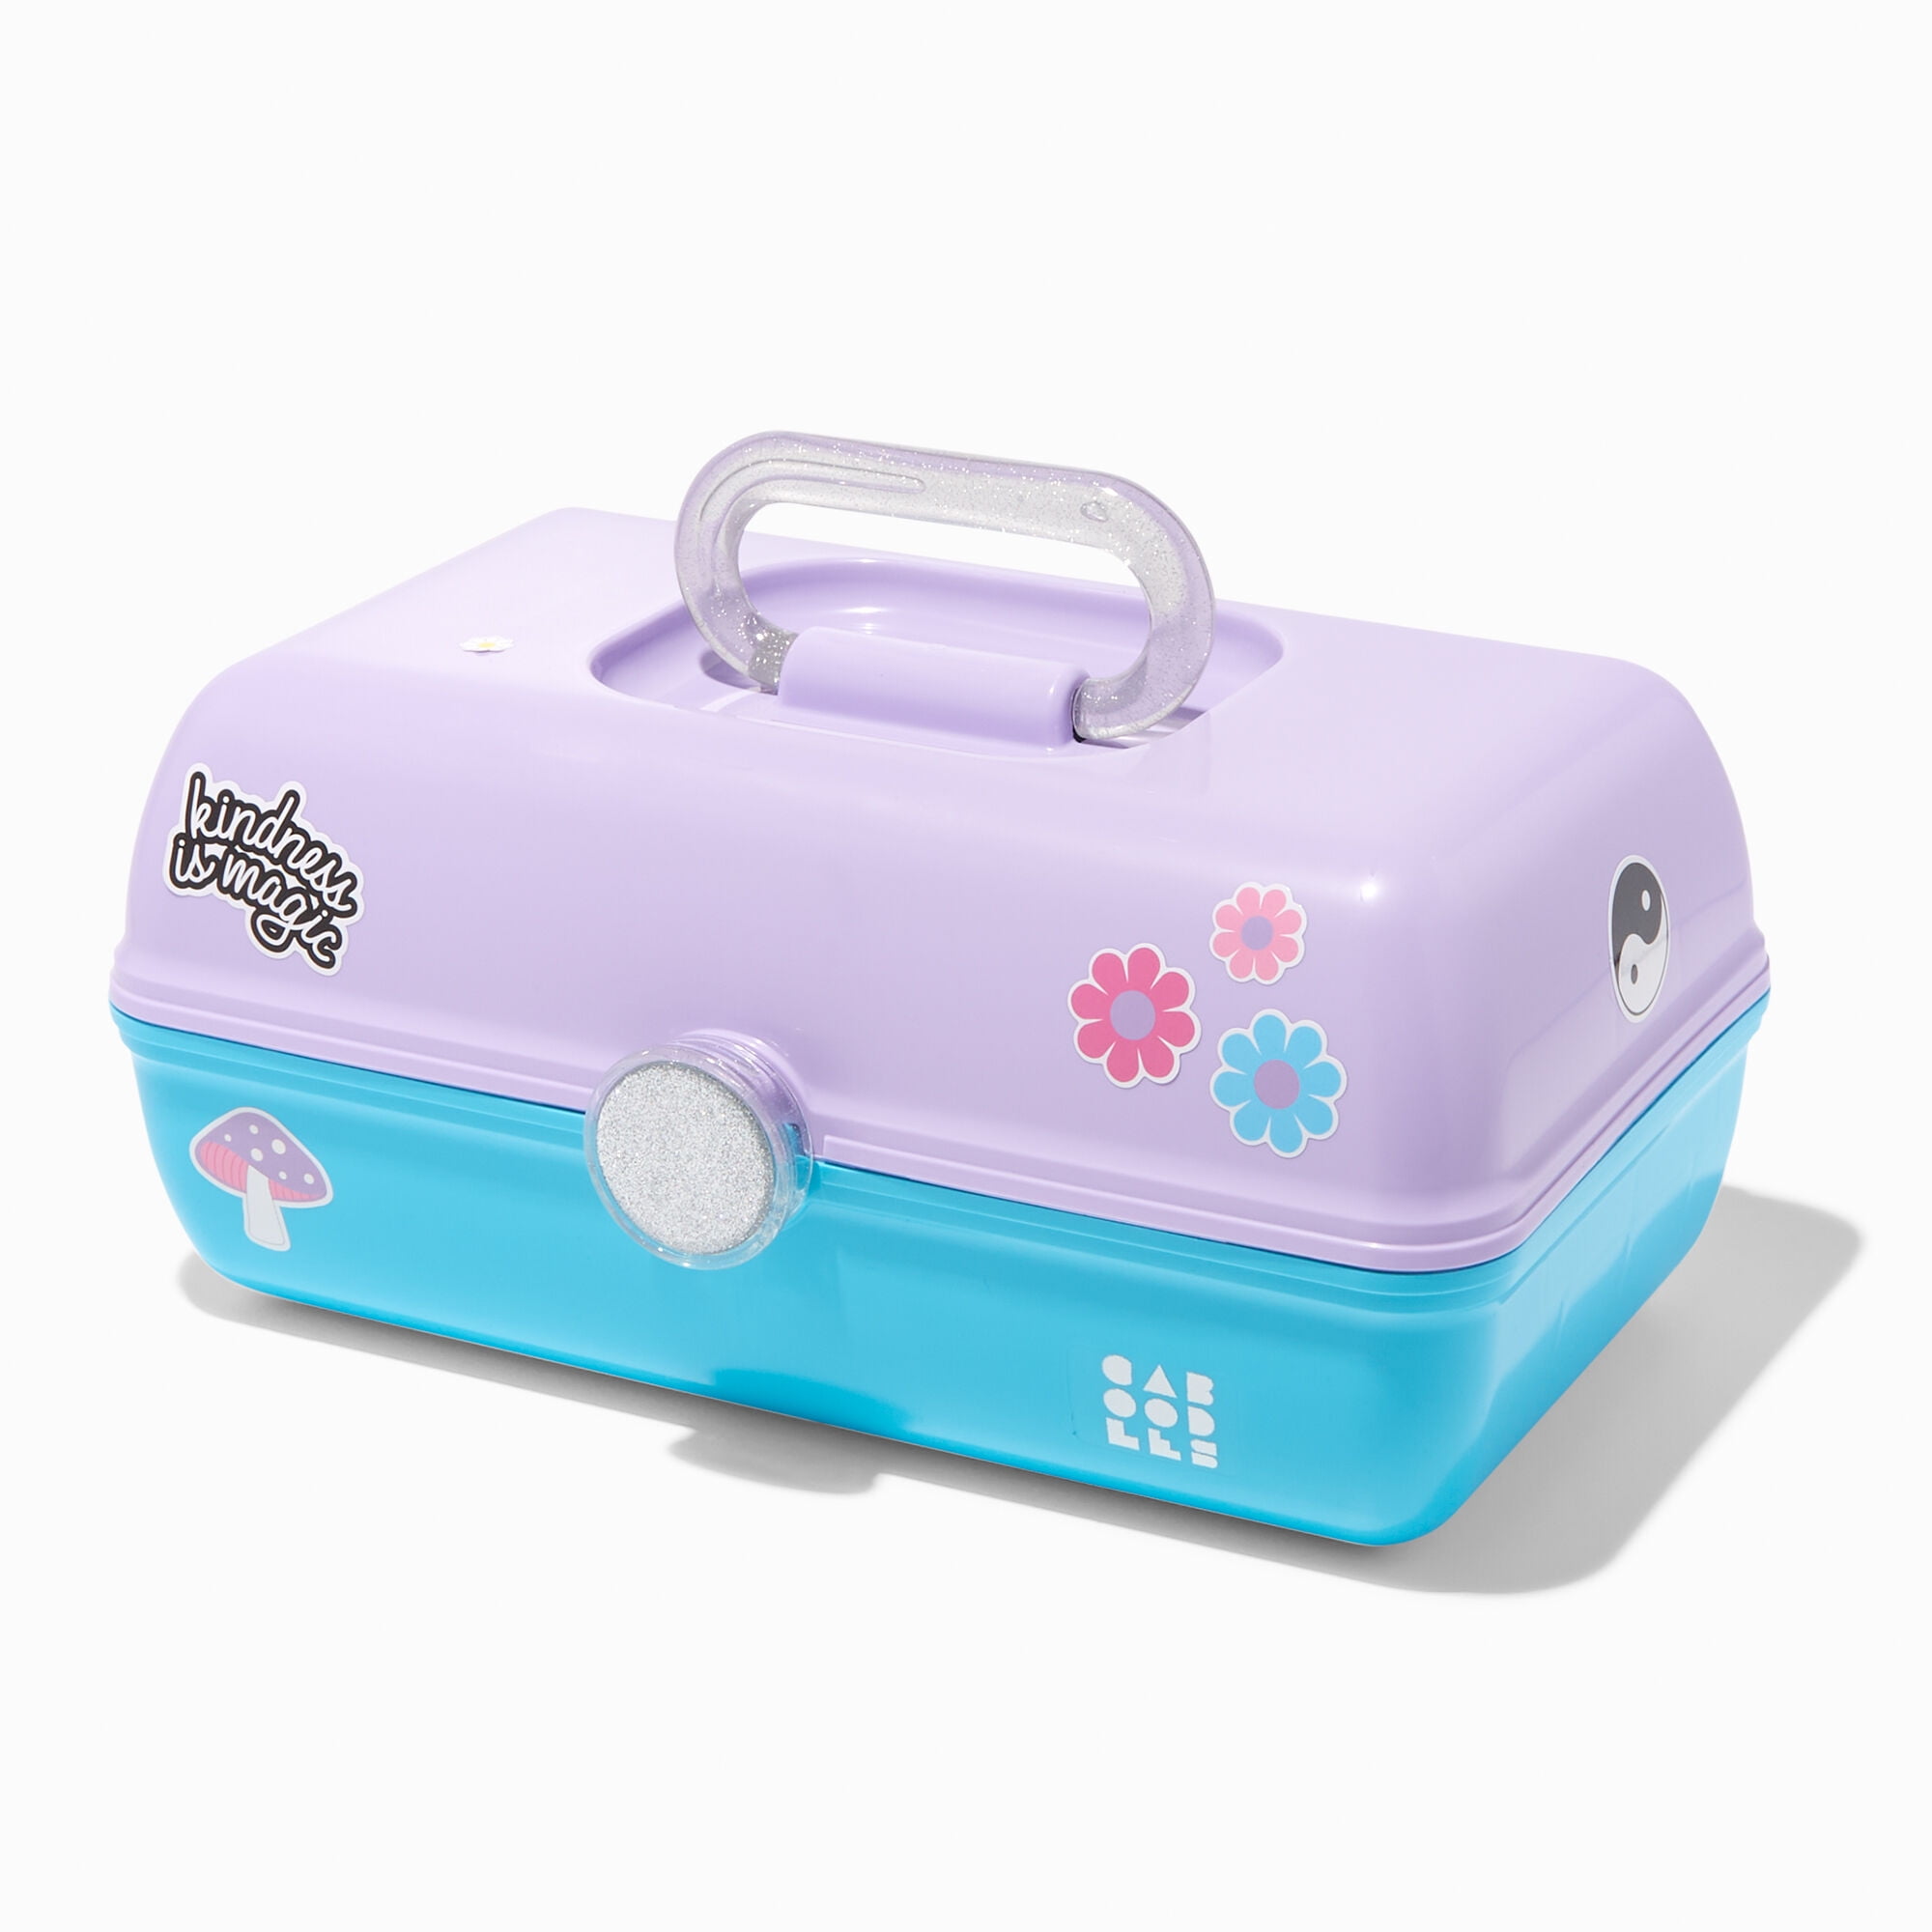  Claire's Features - Caboodles Makeup Case Large On the Go Girl  - Travel Cosmetic Organizer with Mirror - Lavender & Blue with Glitter Gold  Handle: 13 x 7.4 x 6 